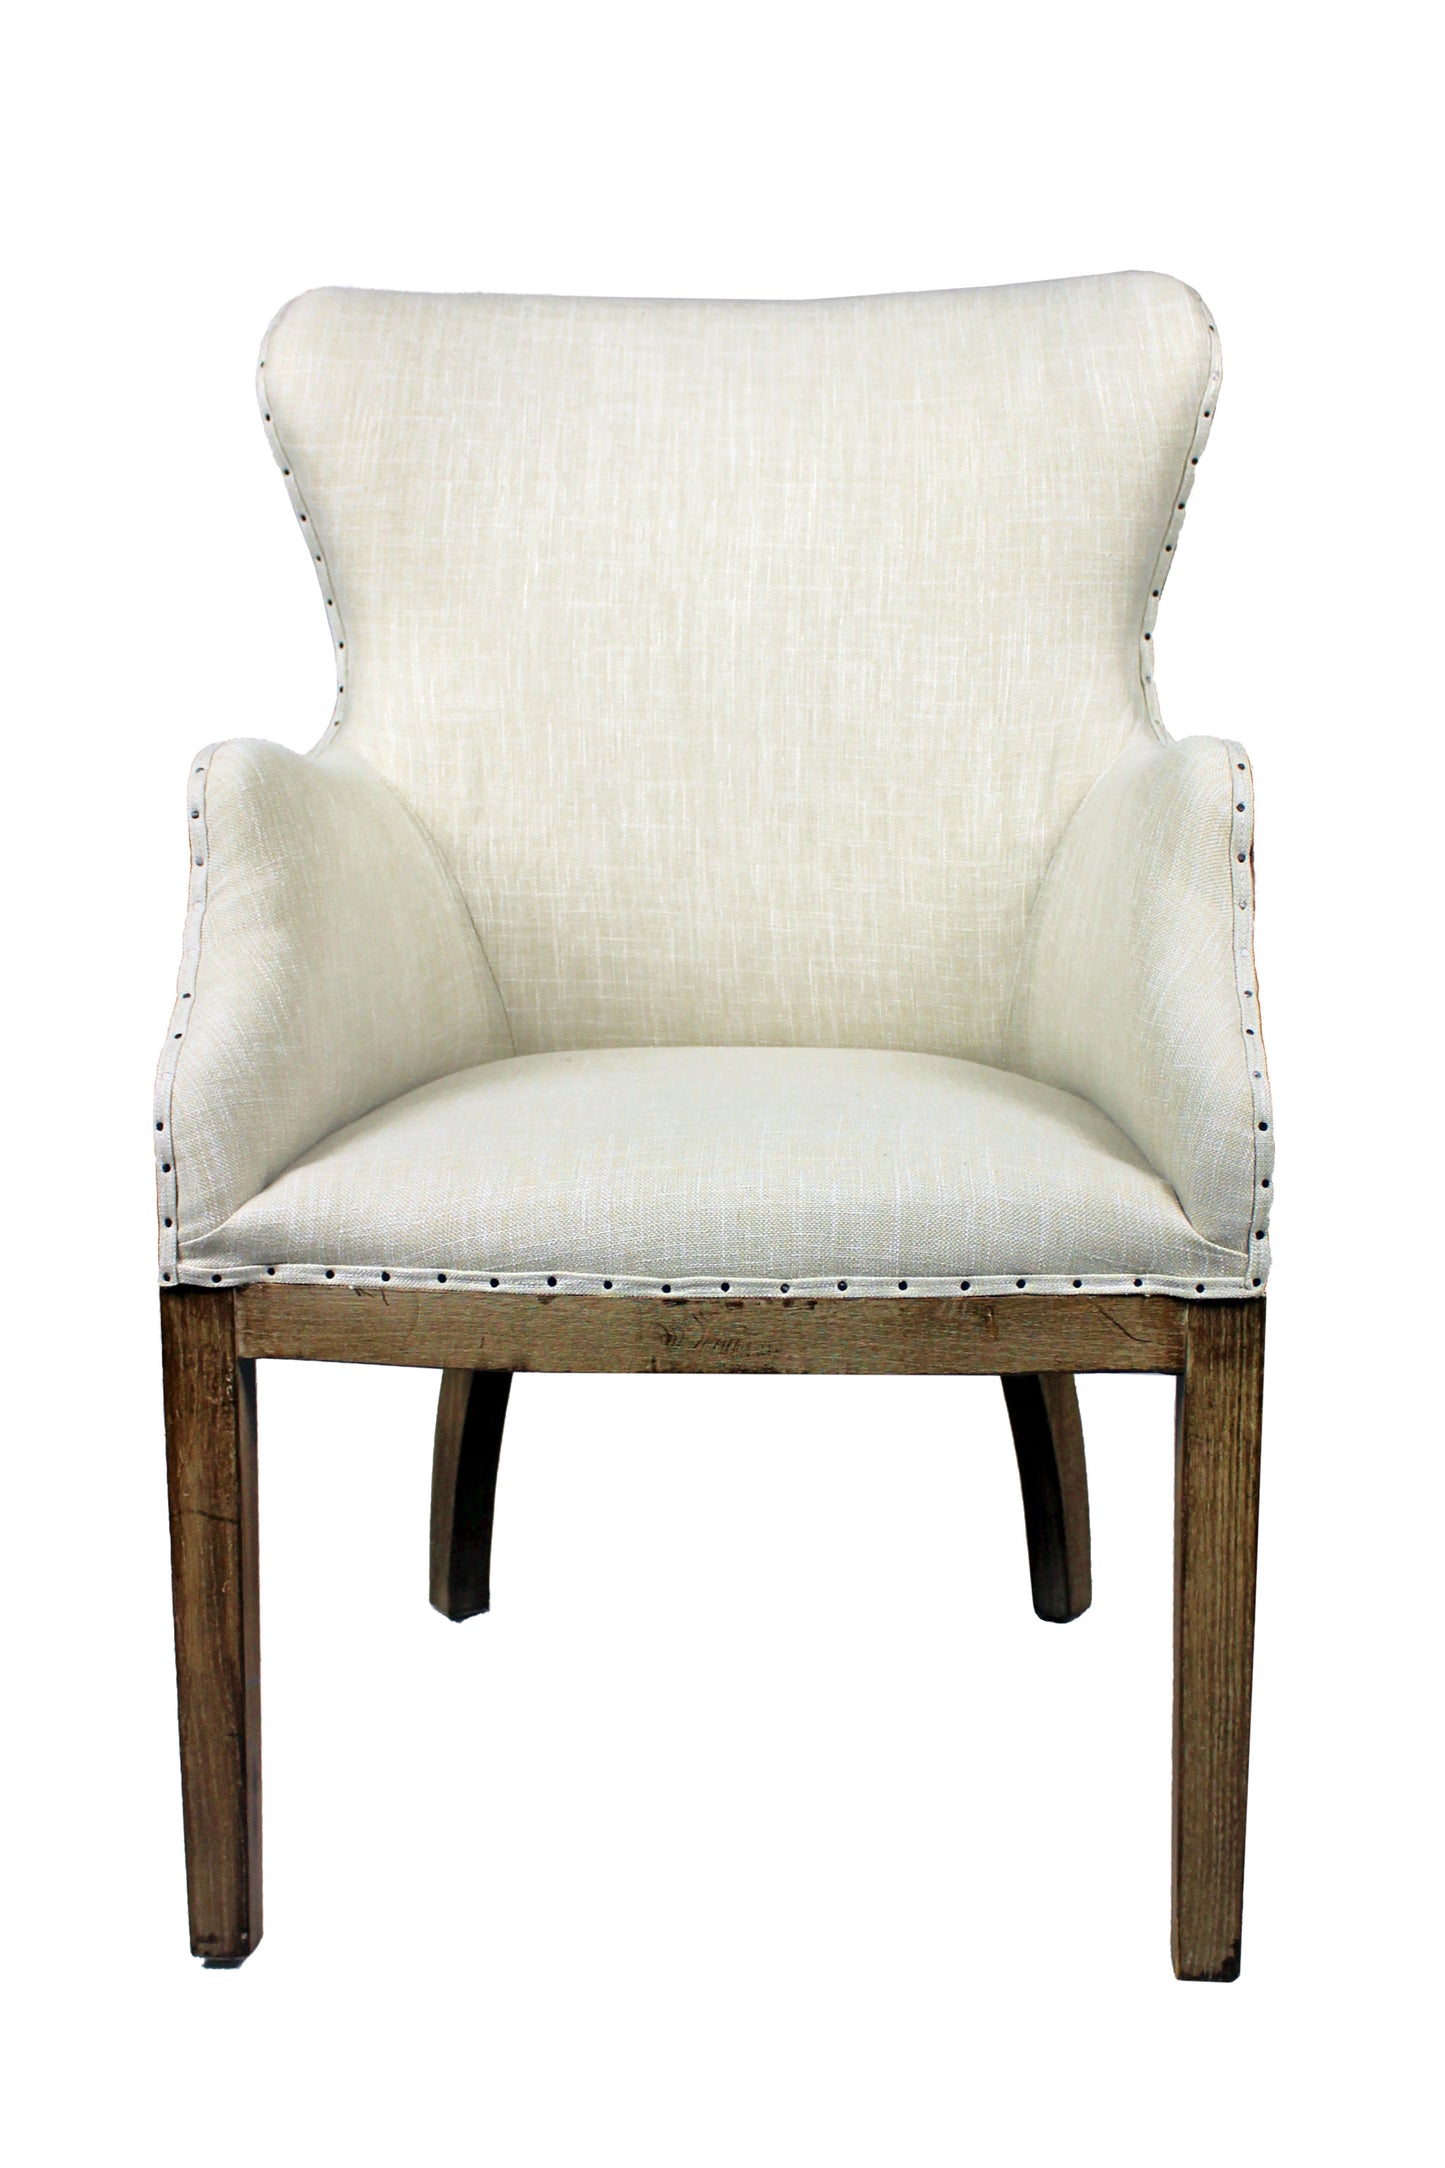 25" Natural Polyester Blend Solid Color Arm Chair